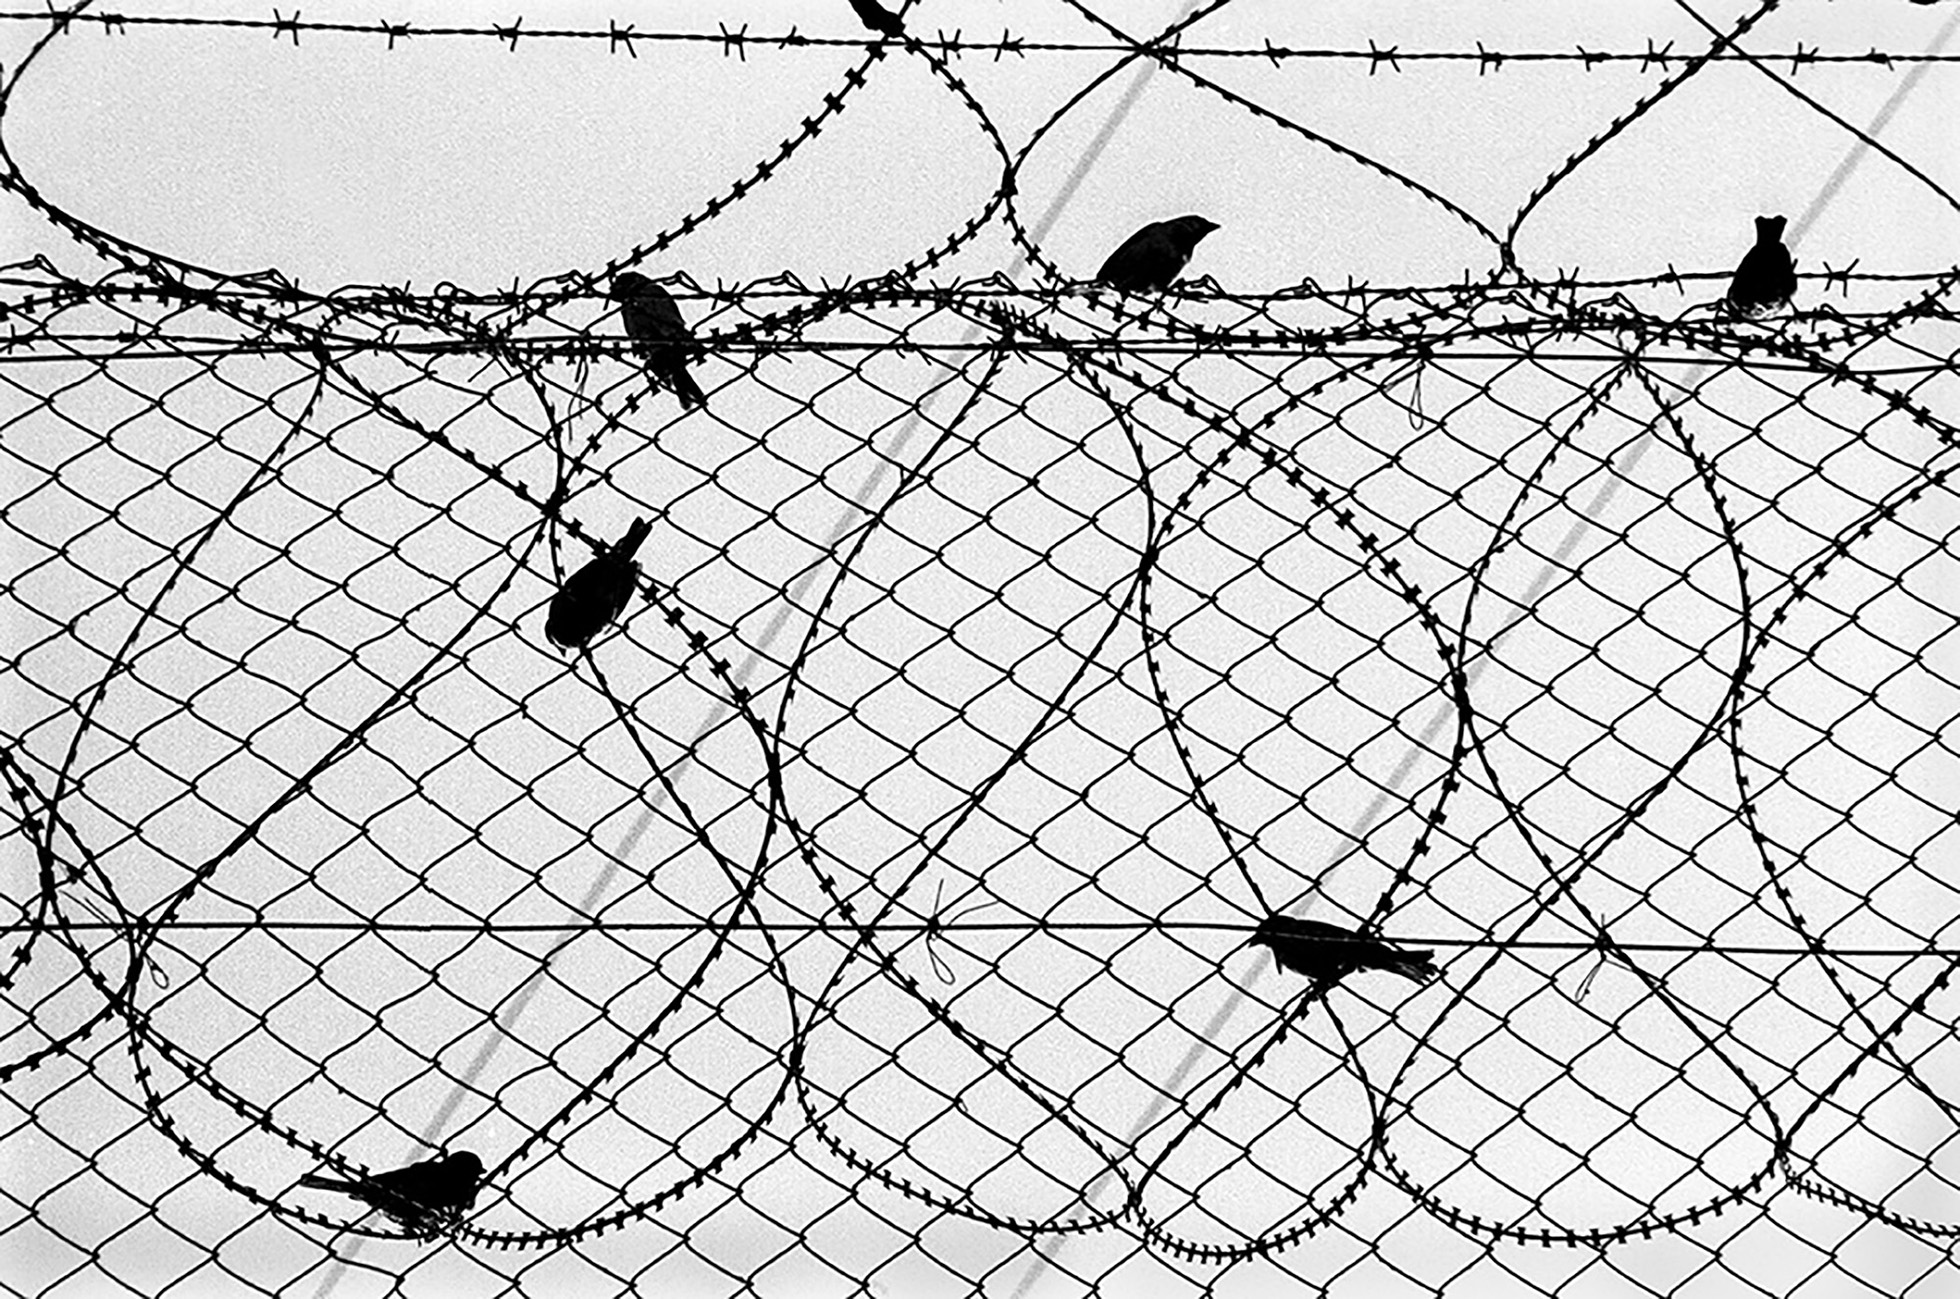 Small birds perched on barbed wire fencing.